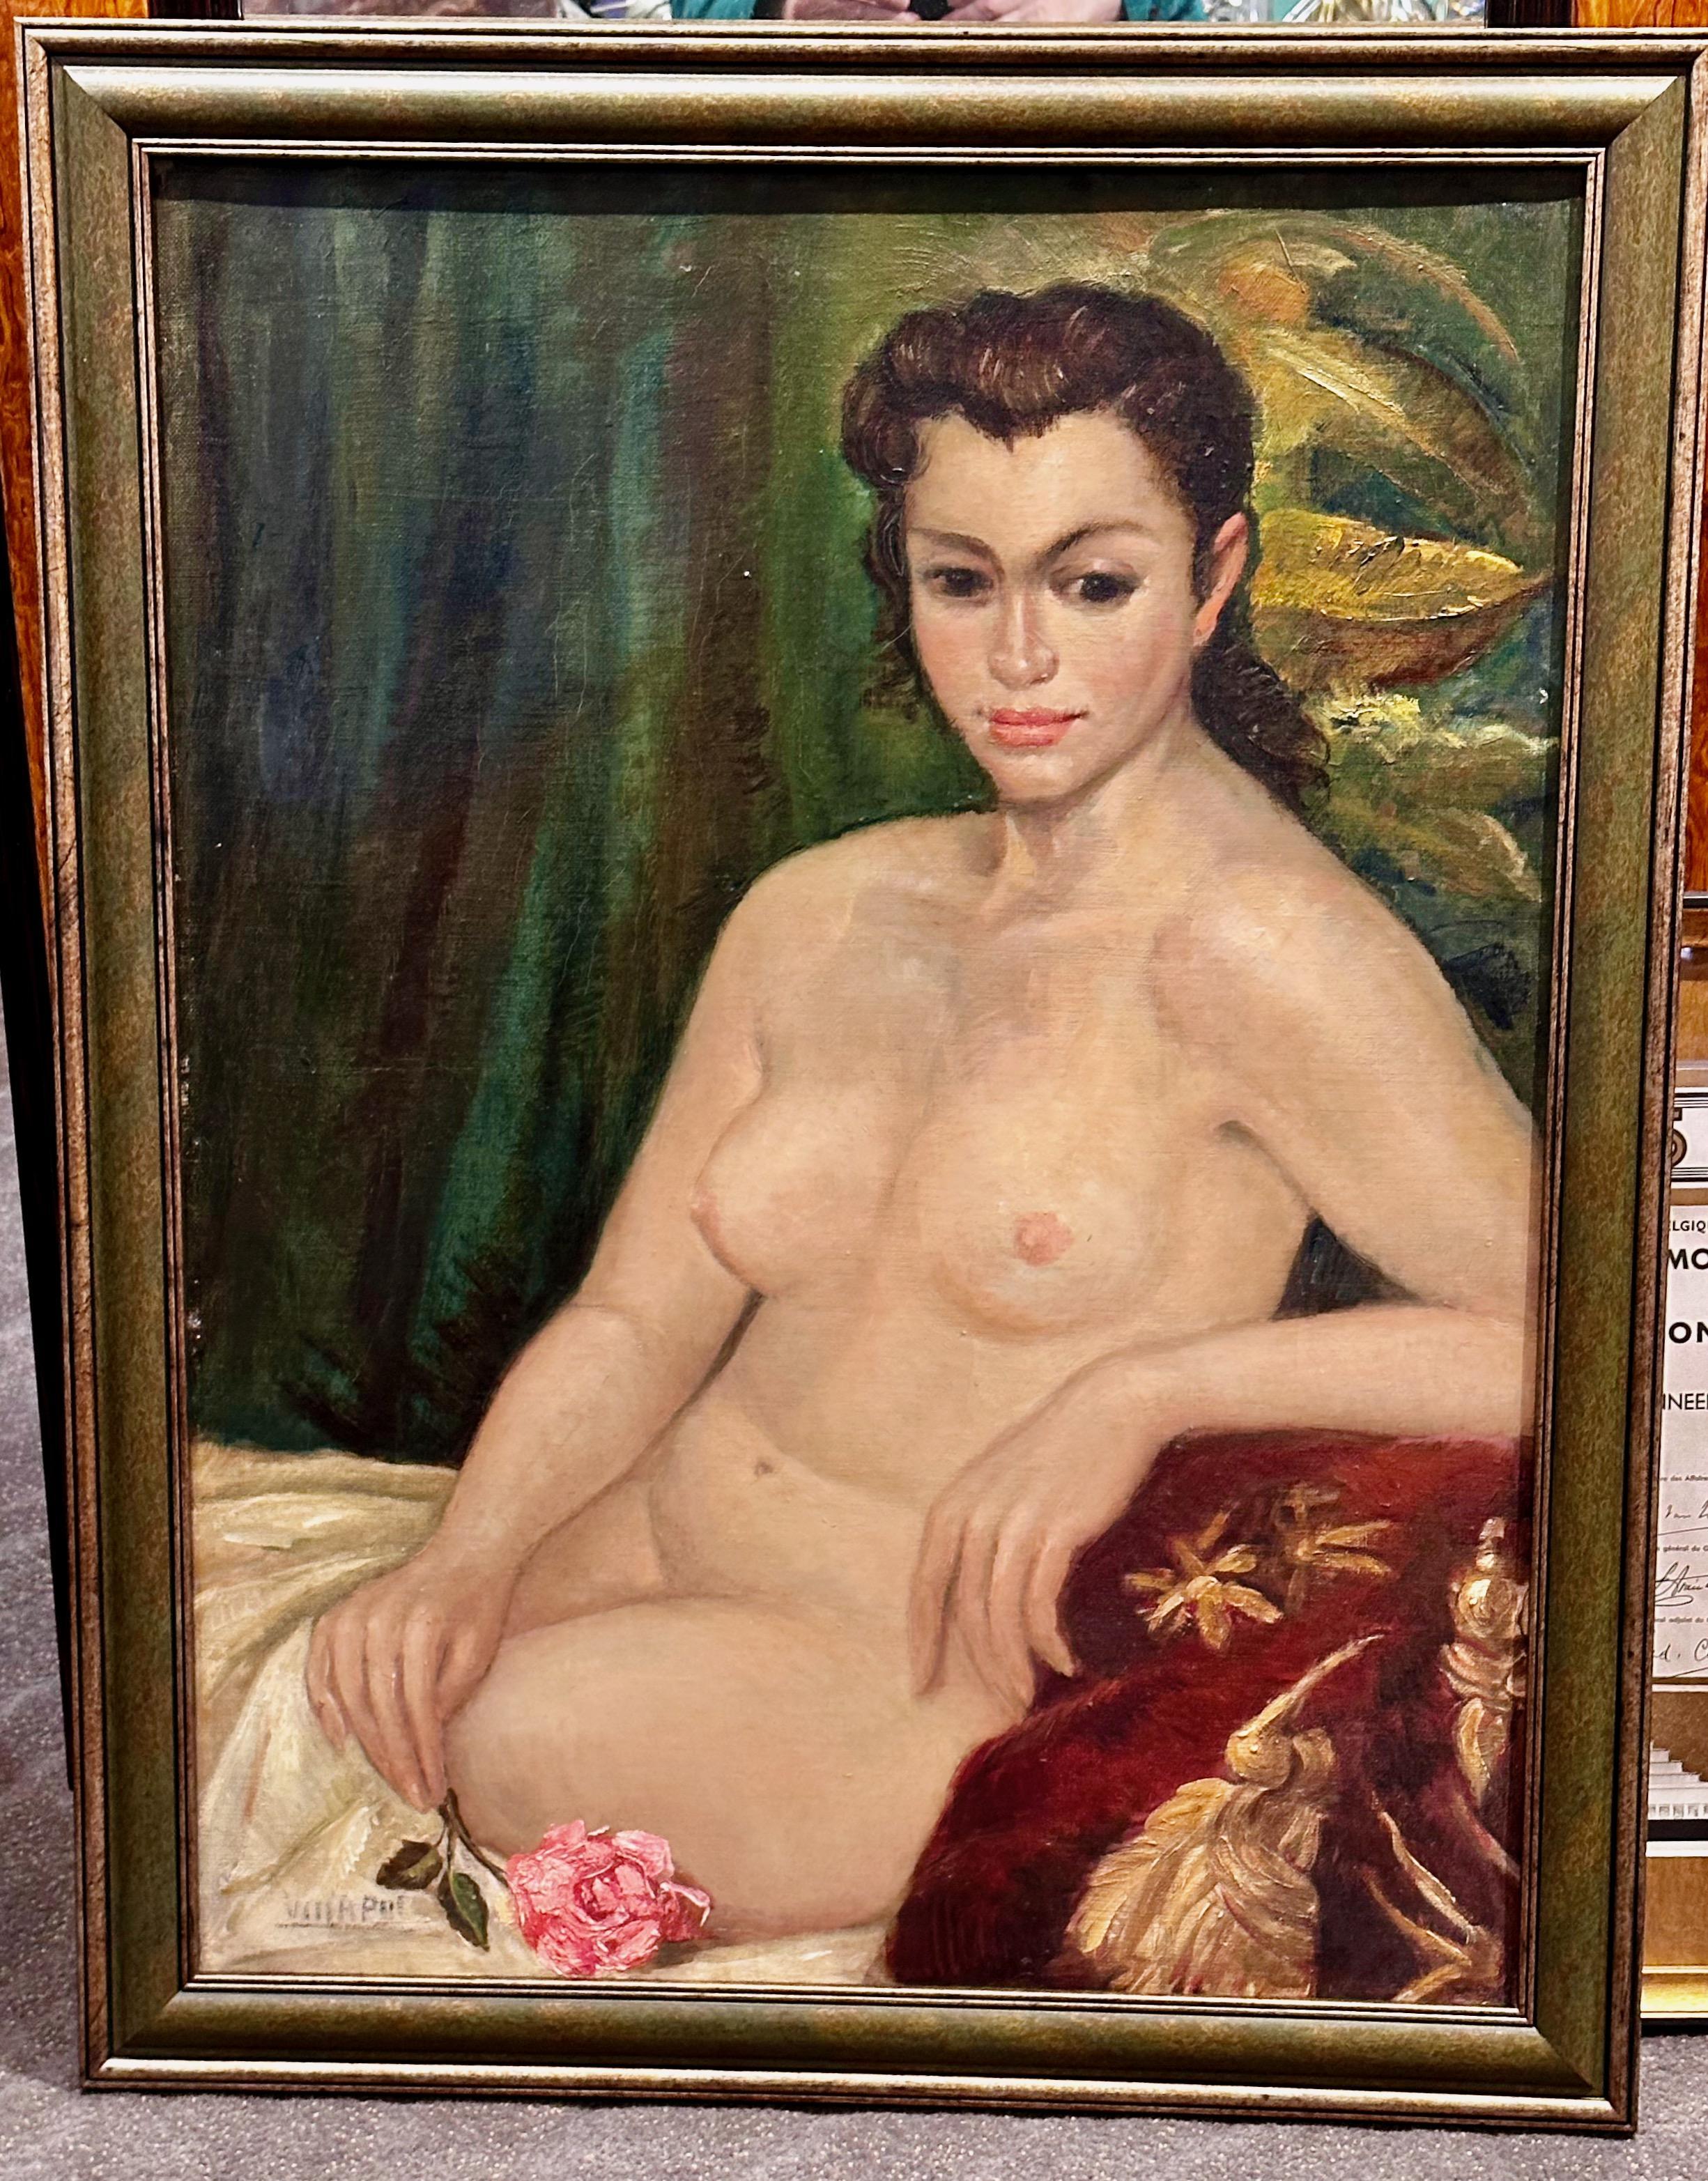 A classic Art Deco Nude Oil Painting of a woman holding a single rose that projects beauty and serenity.

A reclining nude is the essence of what is pure and natural yet also desirable and forbidden.  Nude images are universal and timeless, yet the